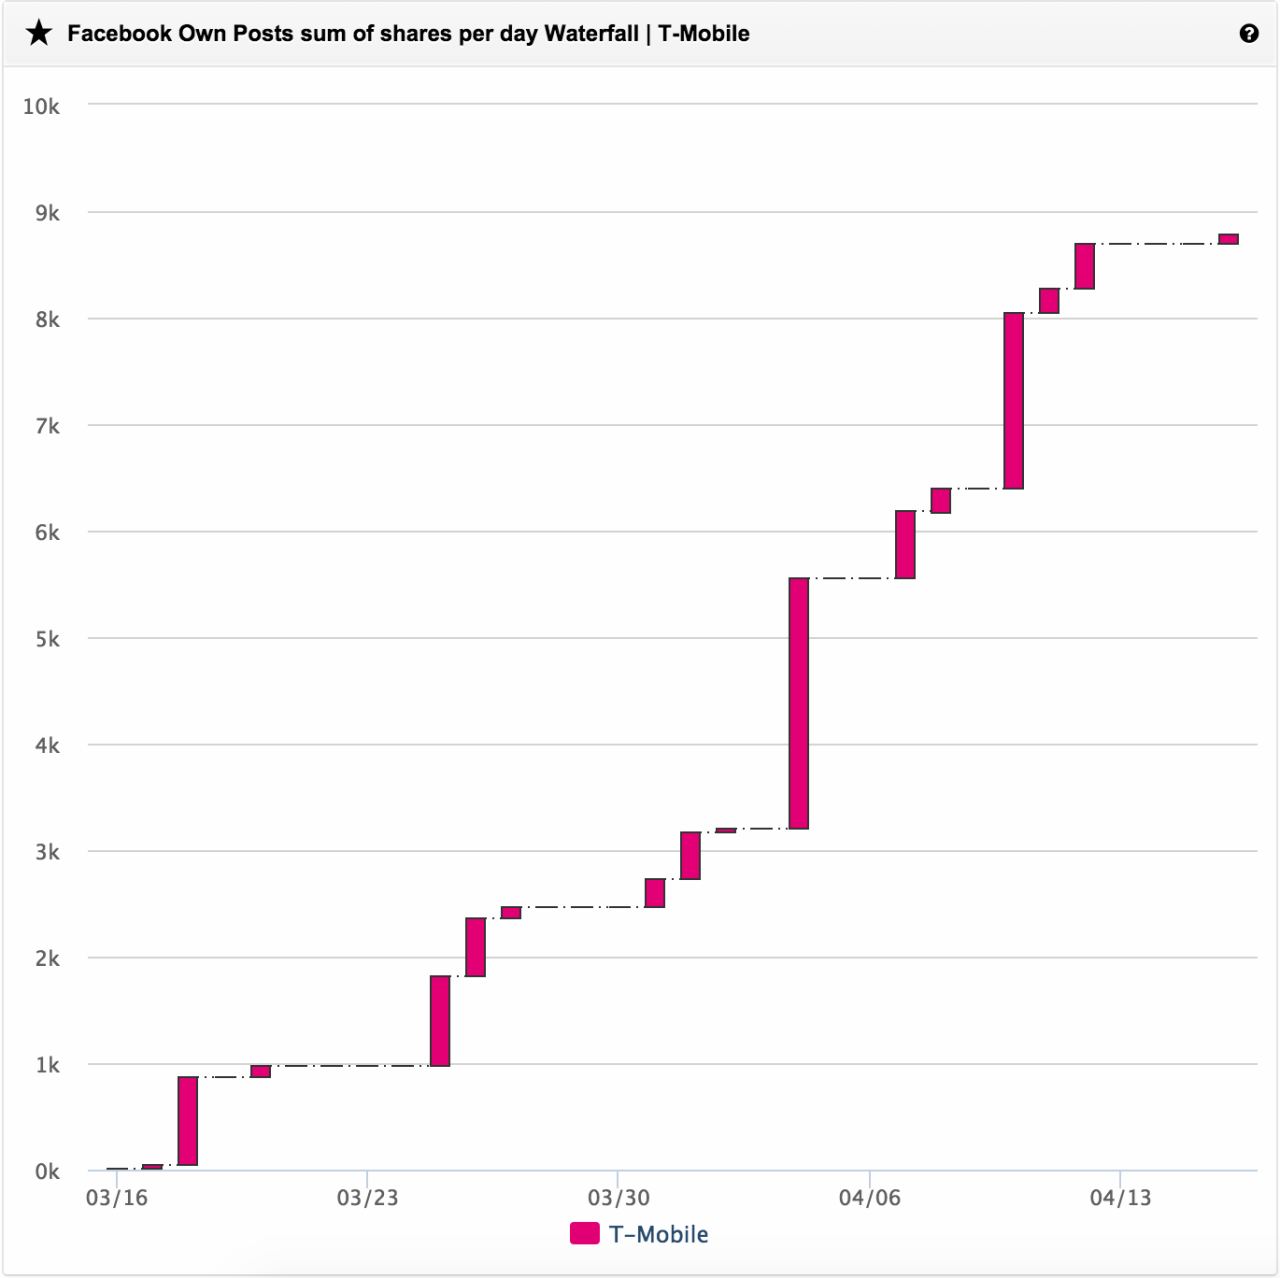 Waterfall Charts show cumulating values and display interactions peaks at a glance. Follow the link to see the difference on a dashboard: http://quint.ly/1OmZvXa